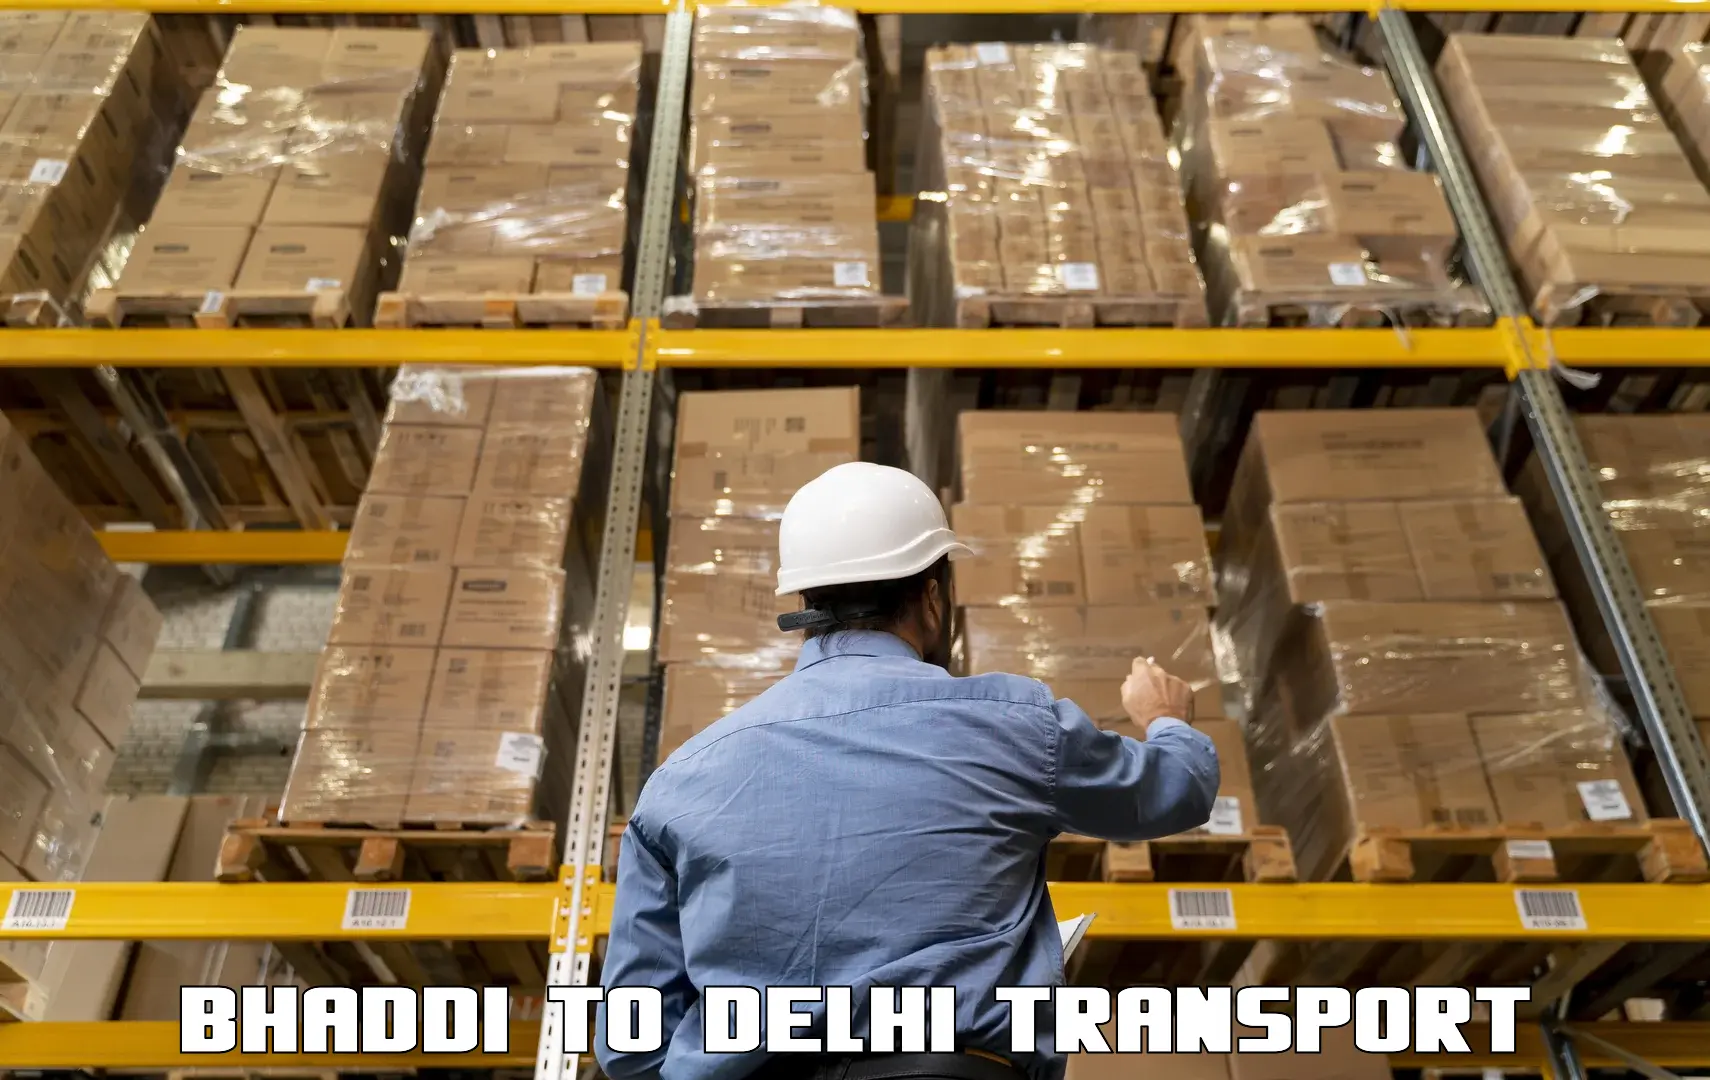 Road transport online services Bhaddi to Indraprastha